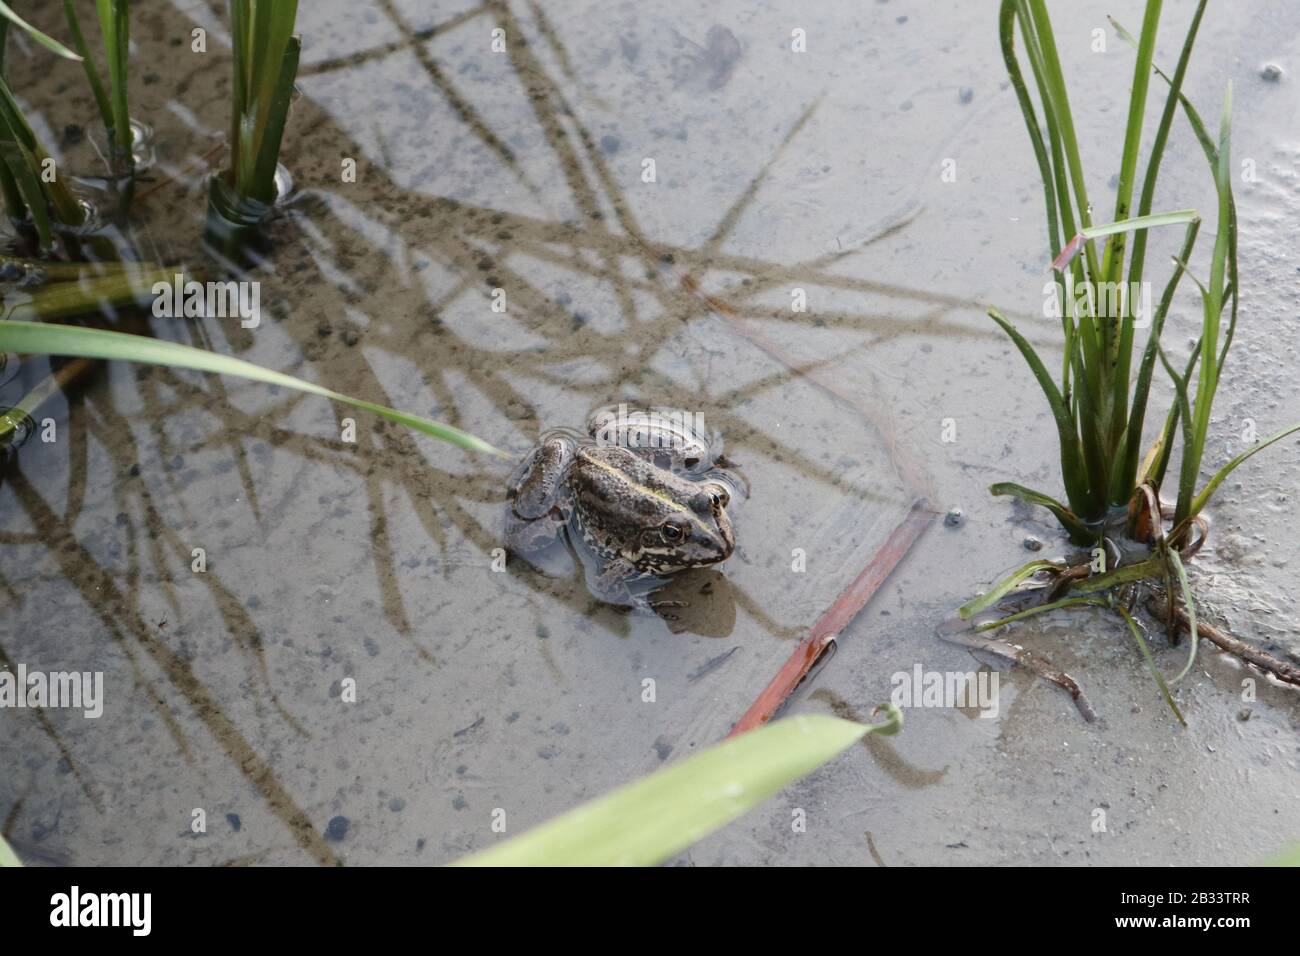 Frog sitting on the river bank shore close-up wild biology fauna nature photo Stock Photo